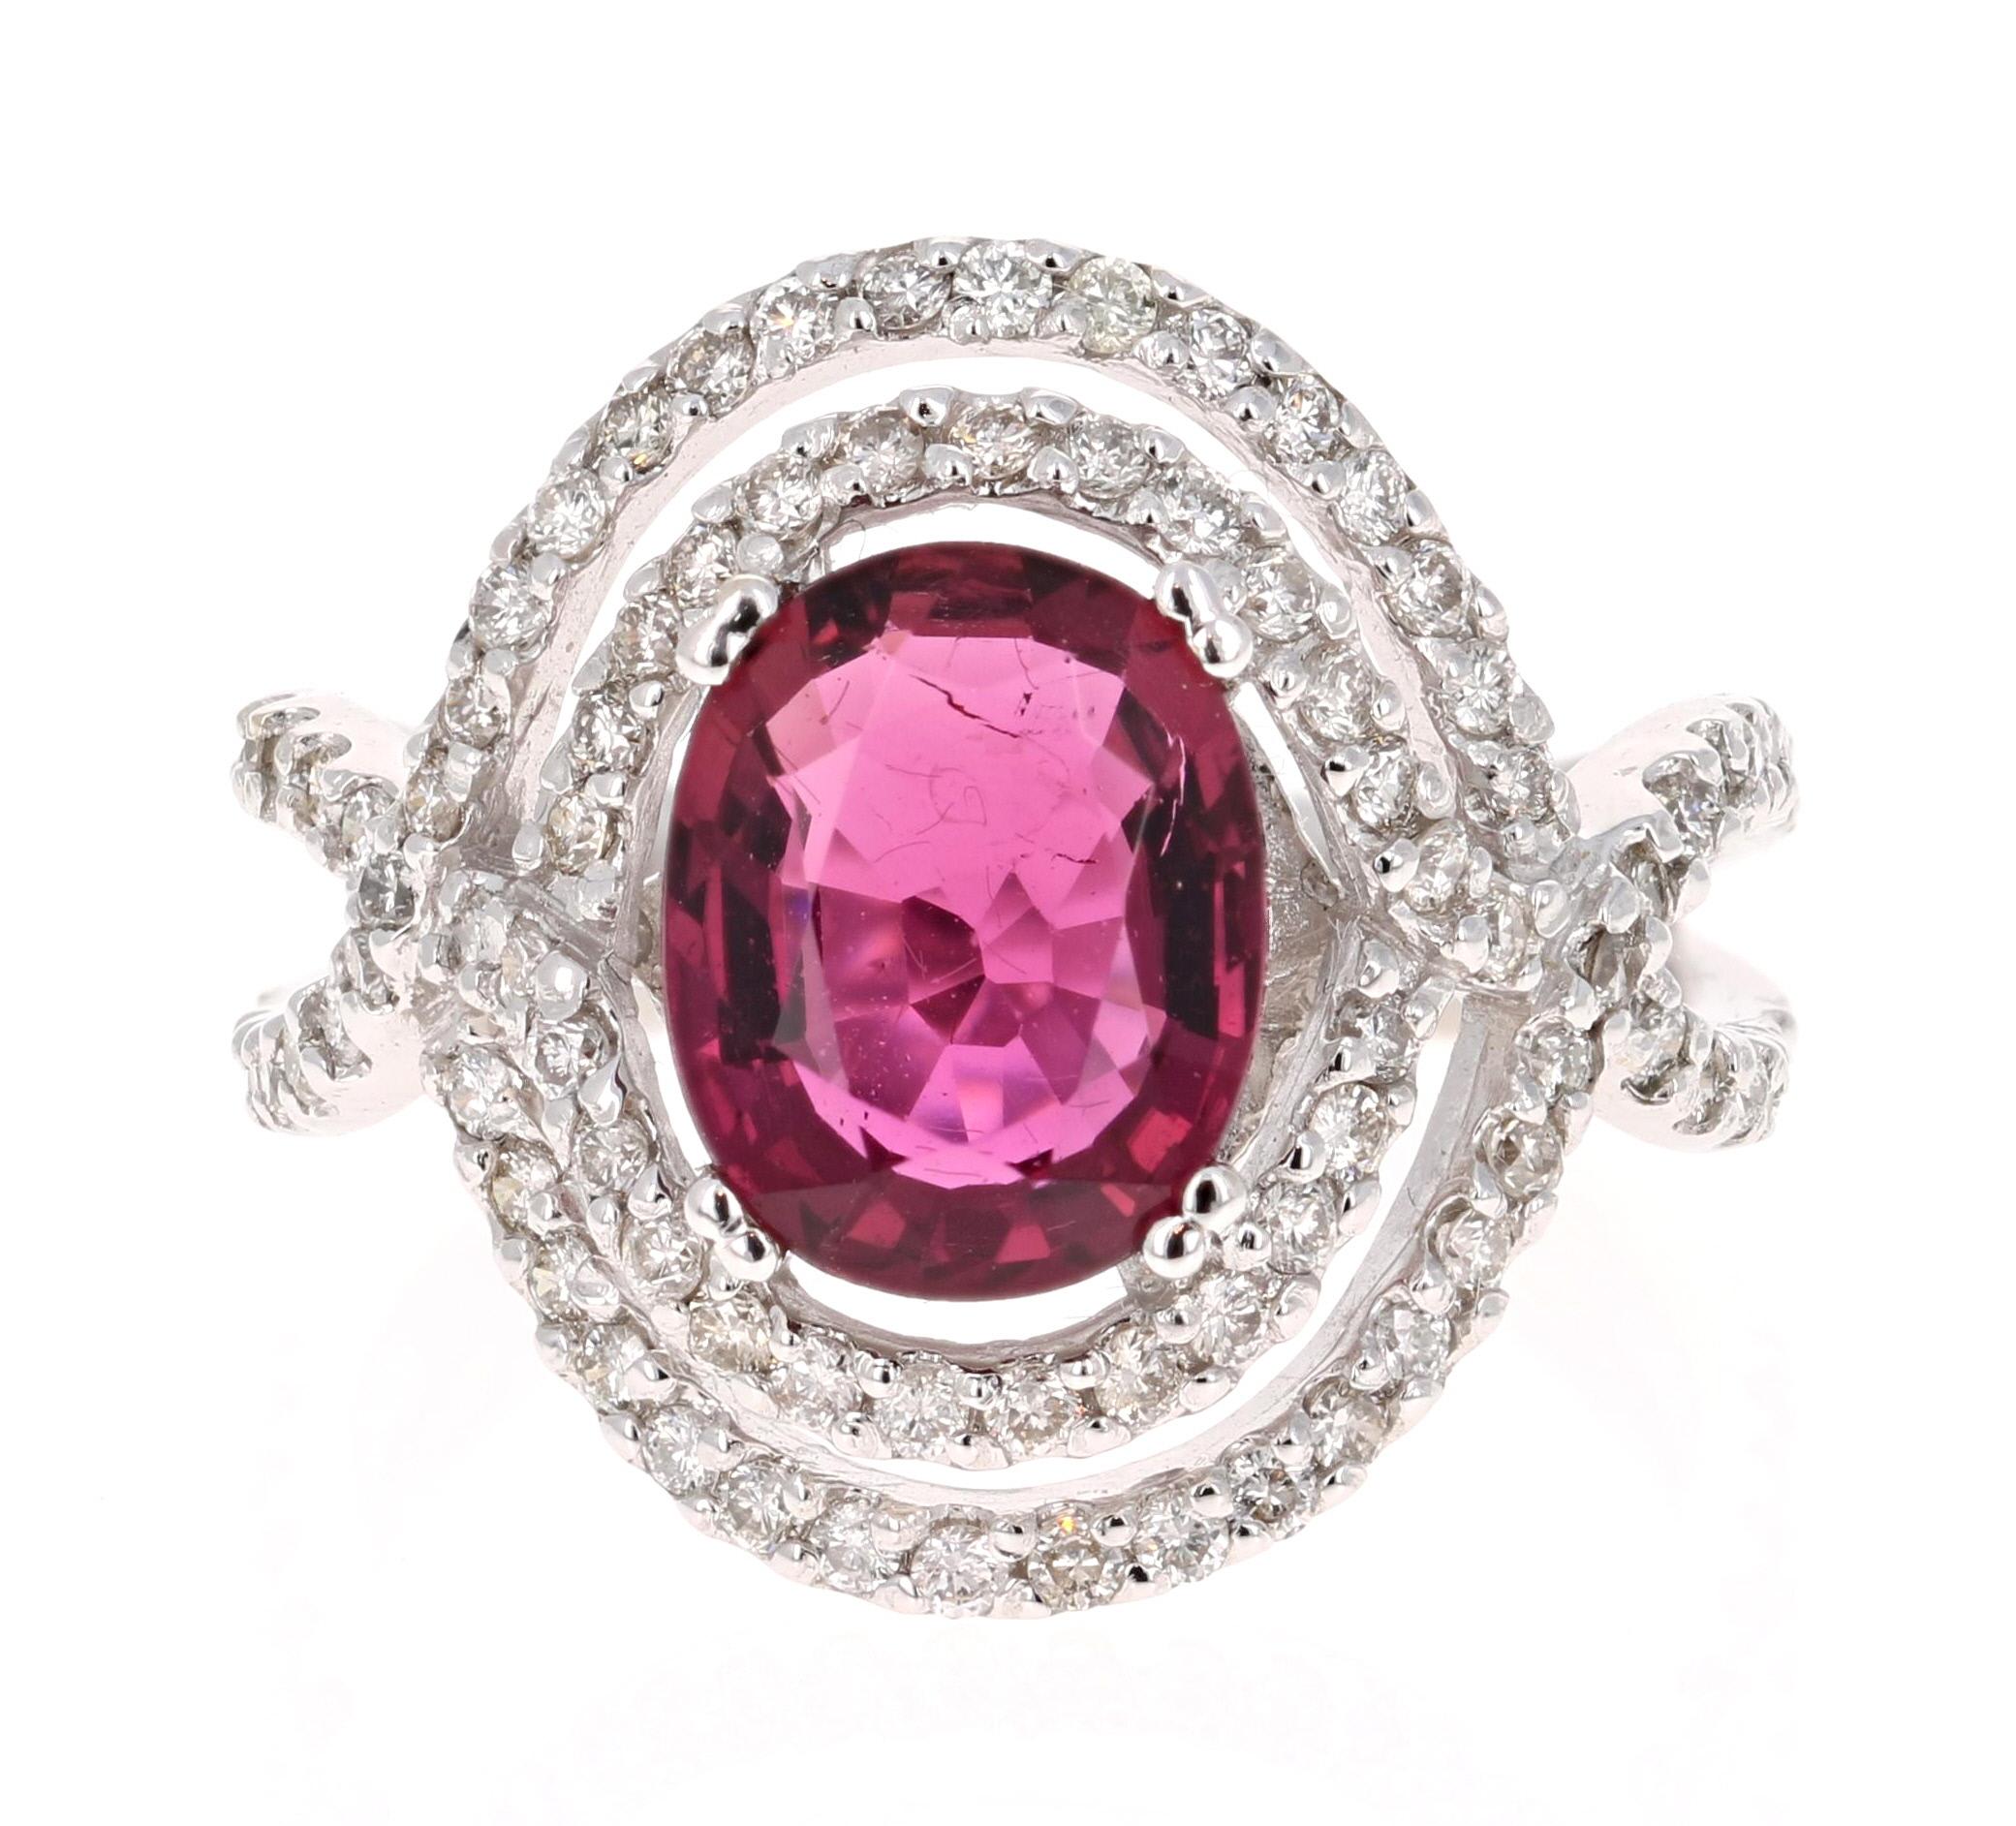 3.15 Carat Oval Cut Pink Tourmaline Diamond White Gold Cocktail Ring 

Absolutely Stunning Pink Tourmaline Ring! This ring has a beautiful setting that will look gorgeous on any hand. It has a Oval Cut Pink Tourmaline weighing 2.35 Carats. There are